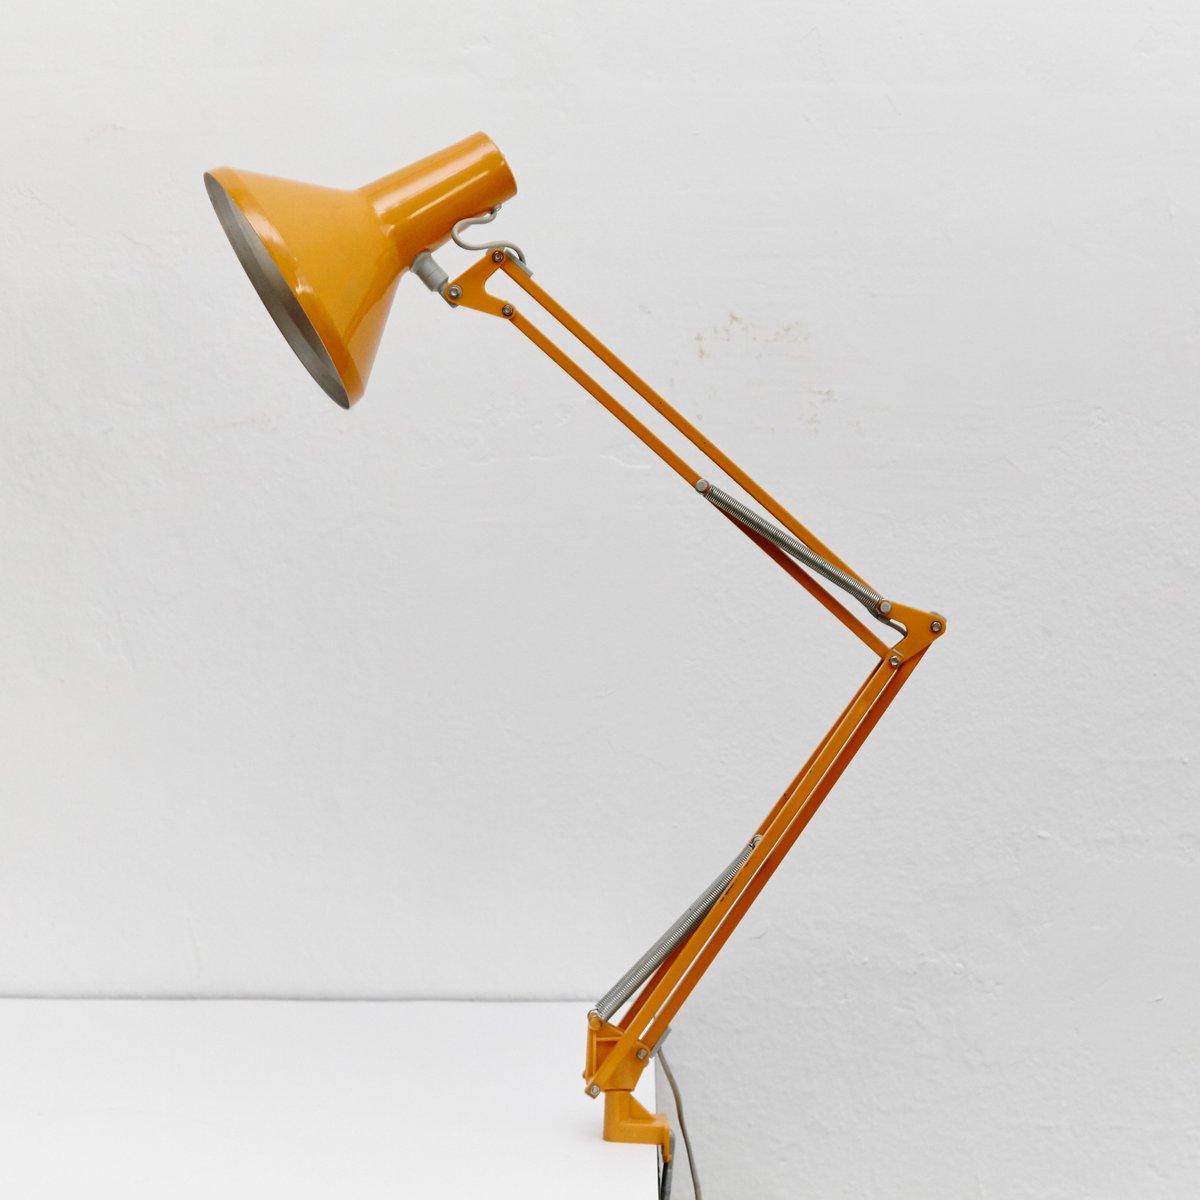 Danish Industrial Yellow Desk Lamp from HCF, 1960s for sale at Pamono